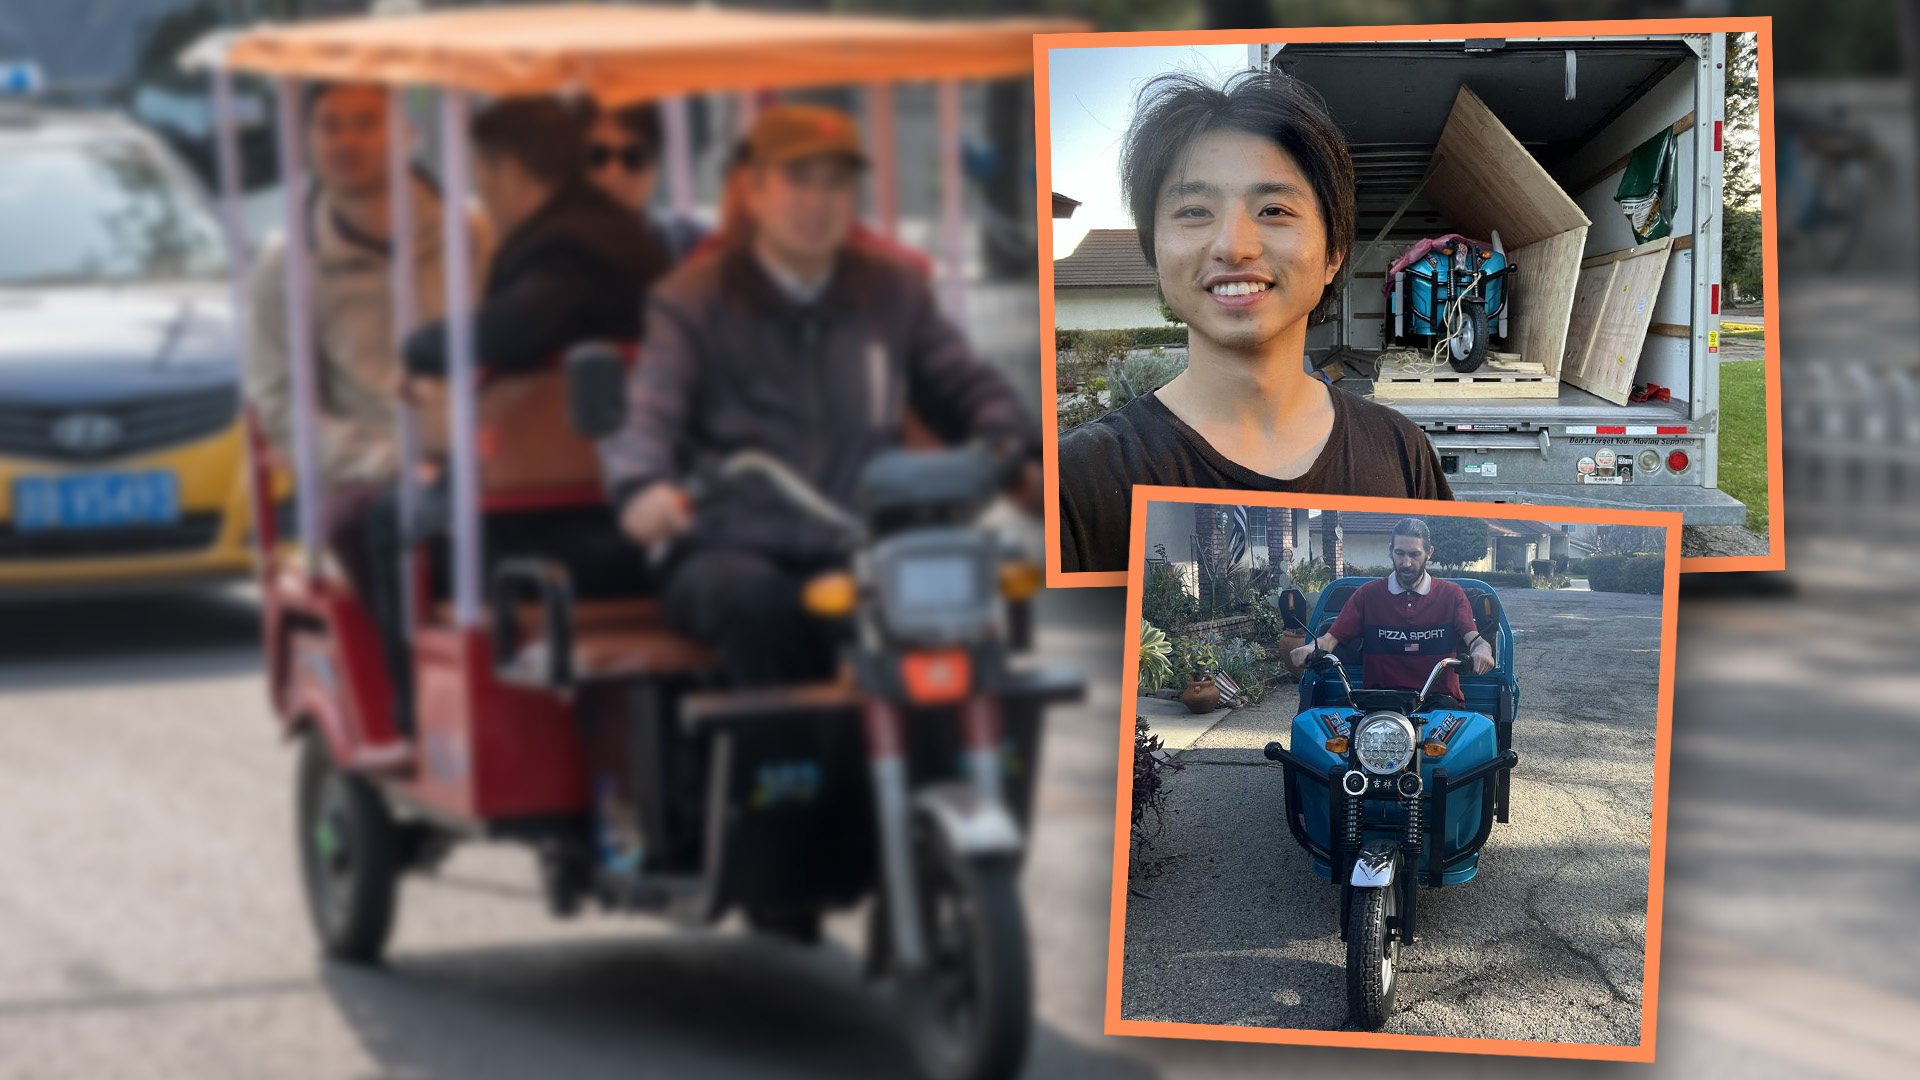 Man in China exports electric pedicabs to US as popular alternatives to cars, says profits no better than selling clothes. Photo: SCMP composite/Shutterstock/Baidu